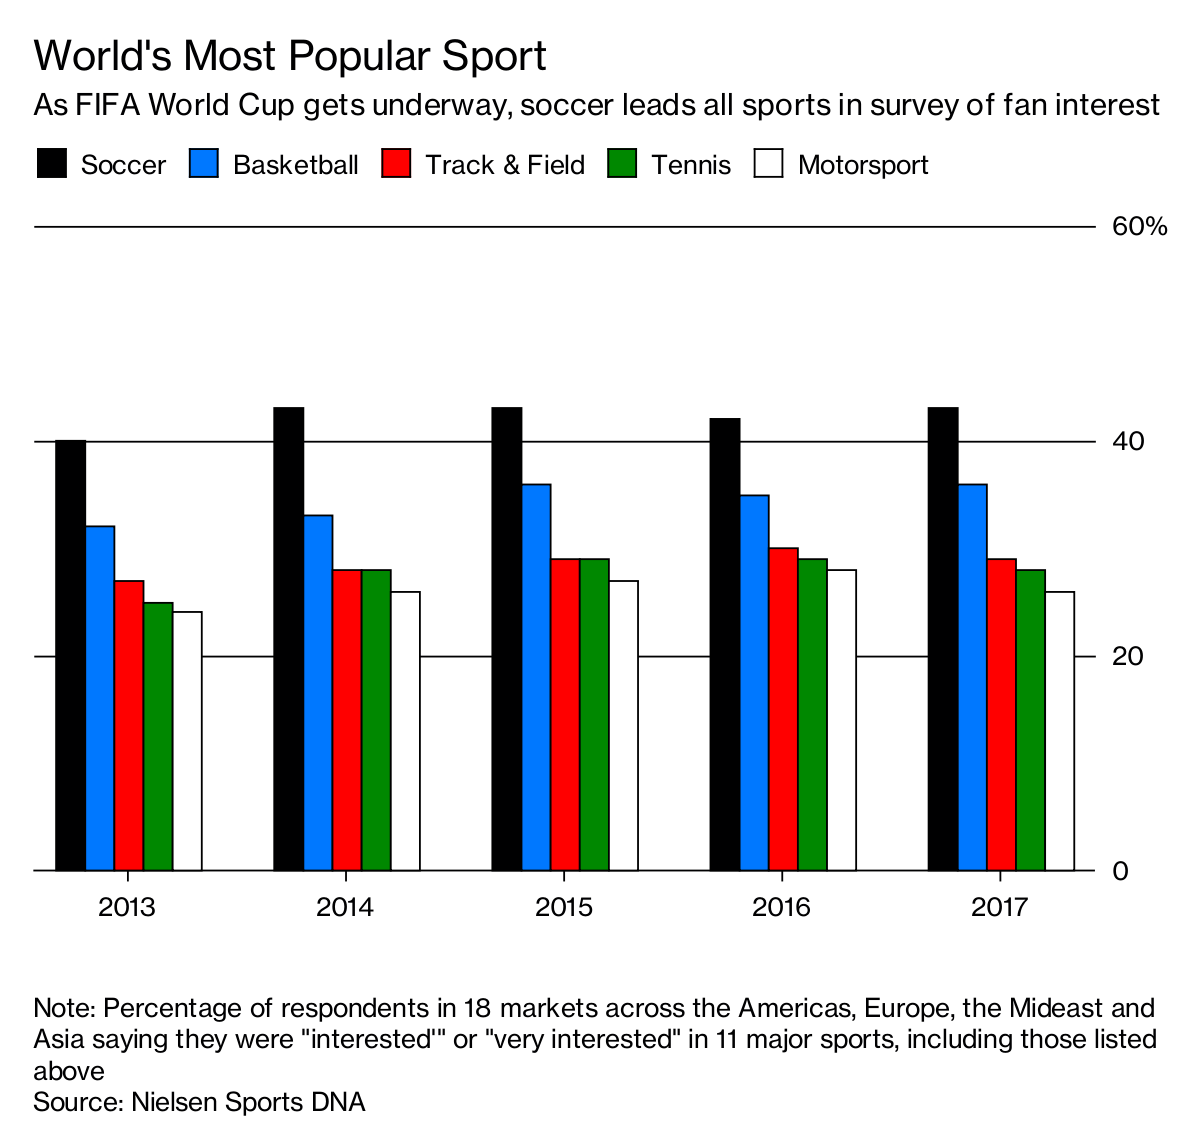 While soccer is the most popular sport in the world – other sports